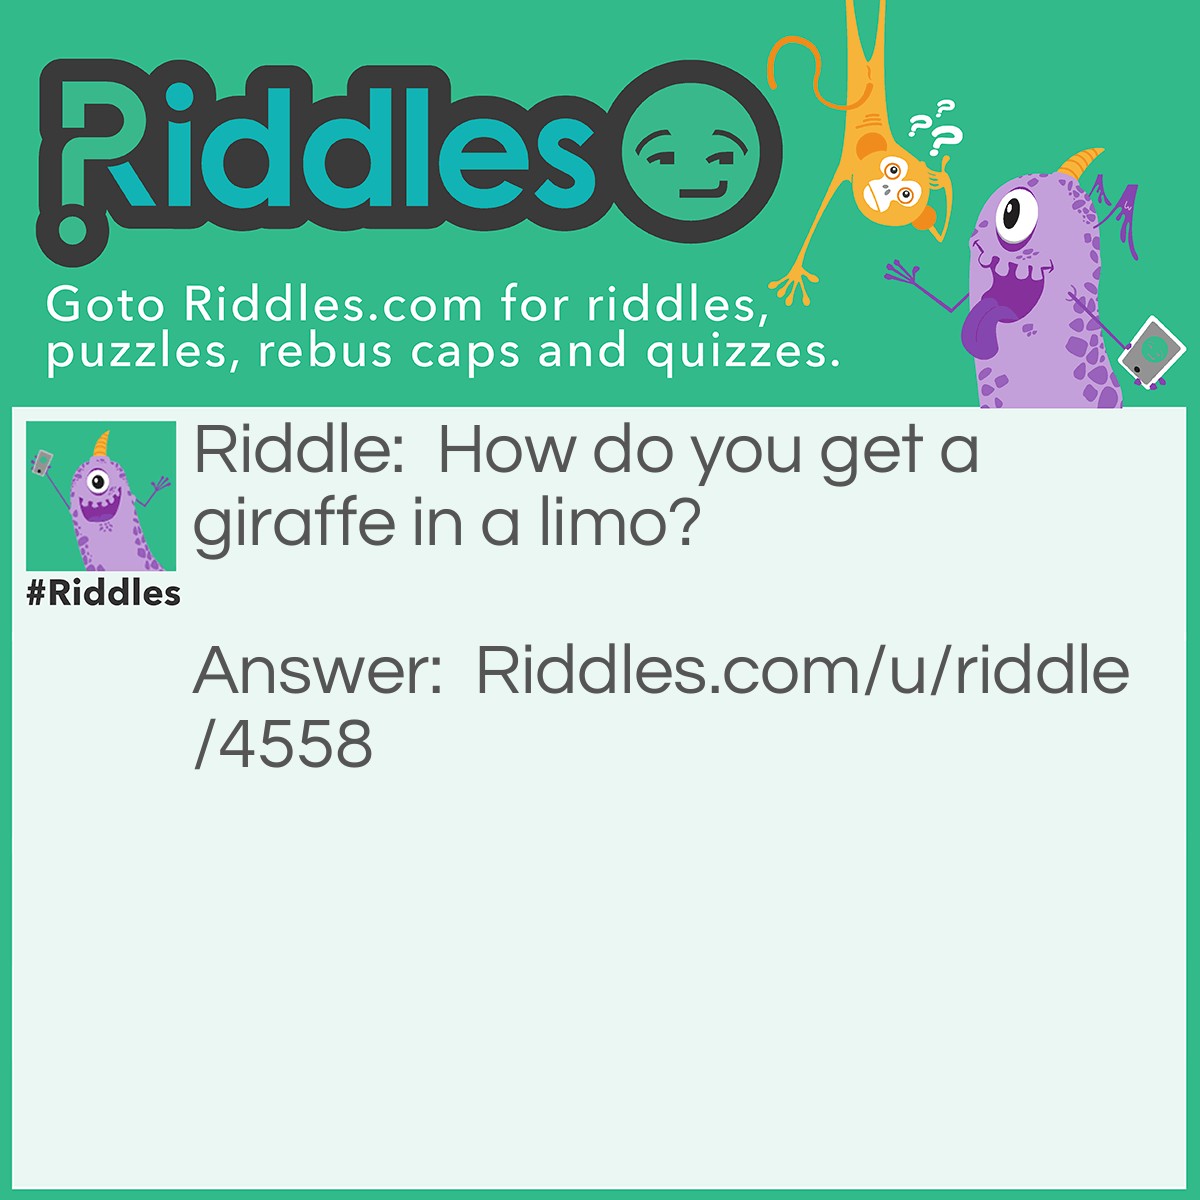 Riddle: How do you get a giraffe in a limo? Answer: Open limo door, insert giraffe, close limo door.